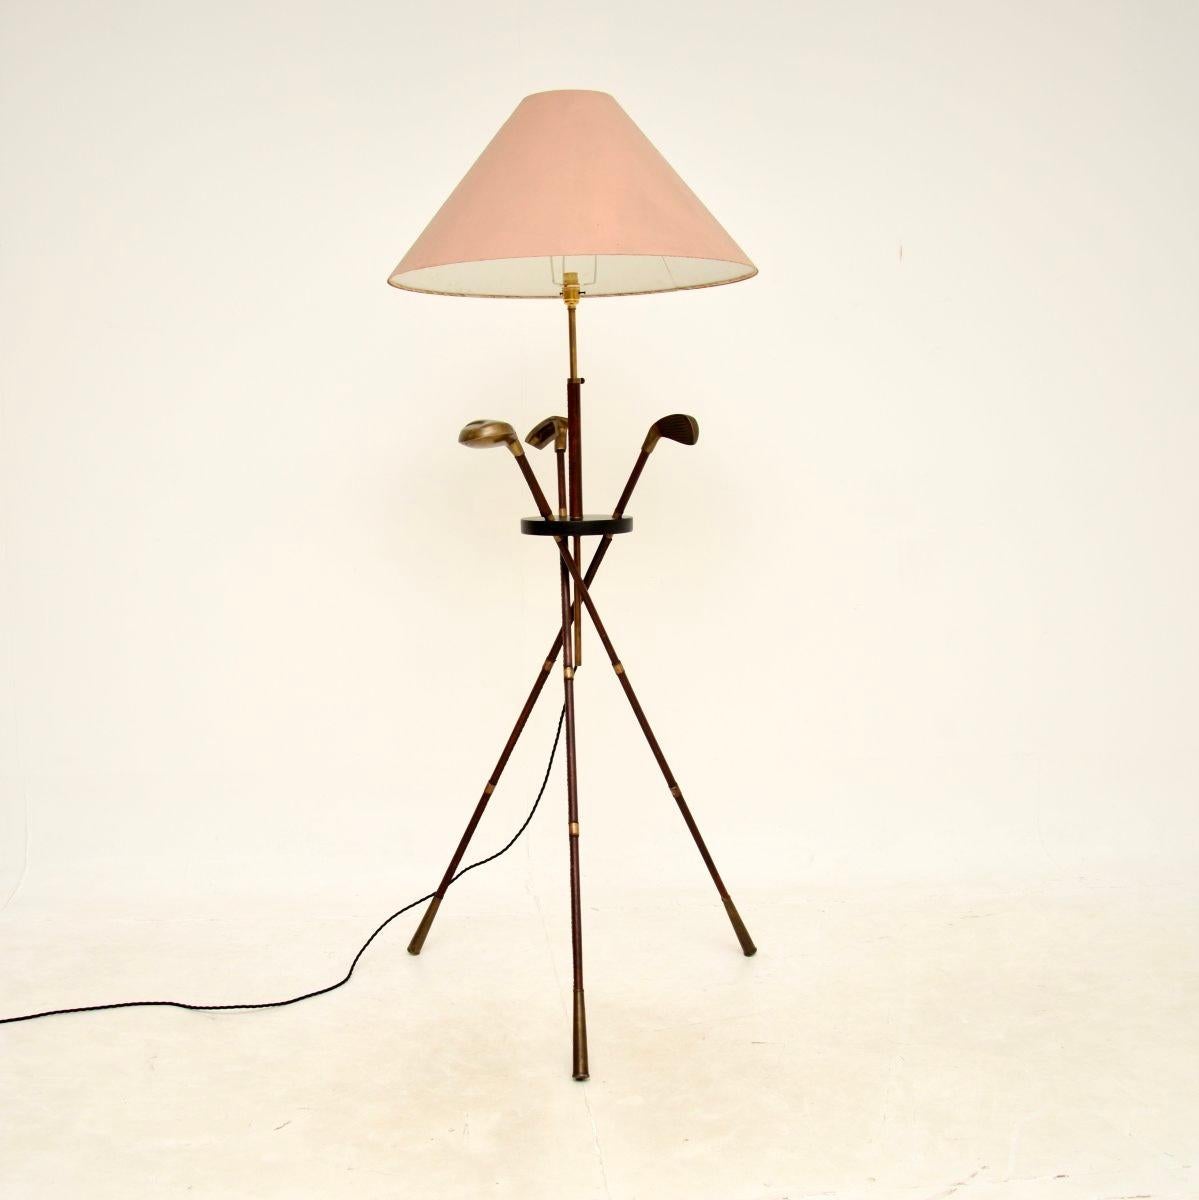 A very interesting and stylish vintage Italian leather and brass floor lamp. This was made in Italy, it dates from around the 1970’s.

It is designed as three golf clubs leaning on each other, the shafts all clad in leather with brass handles and